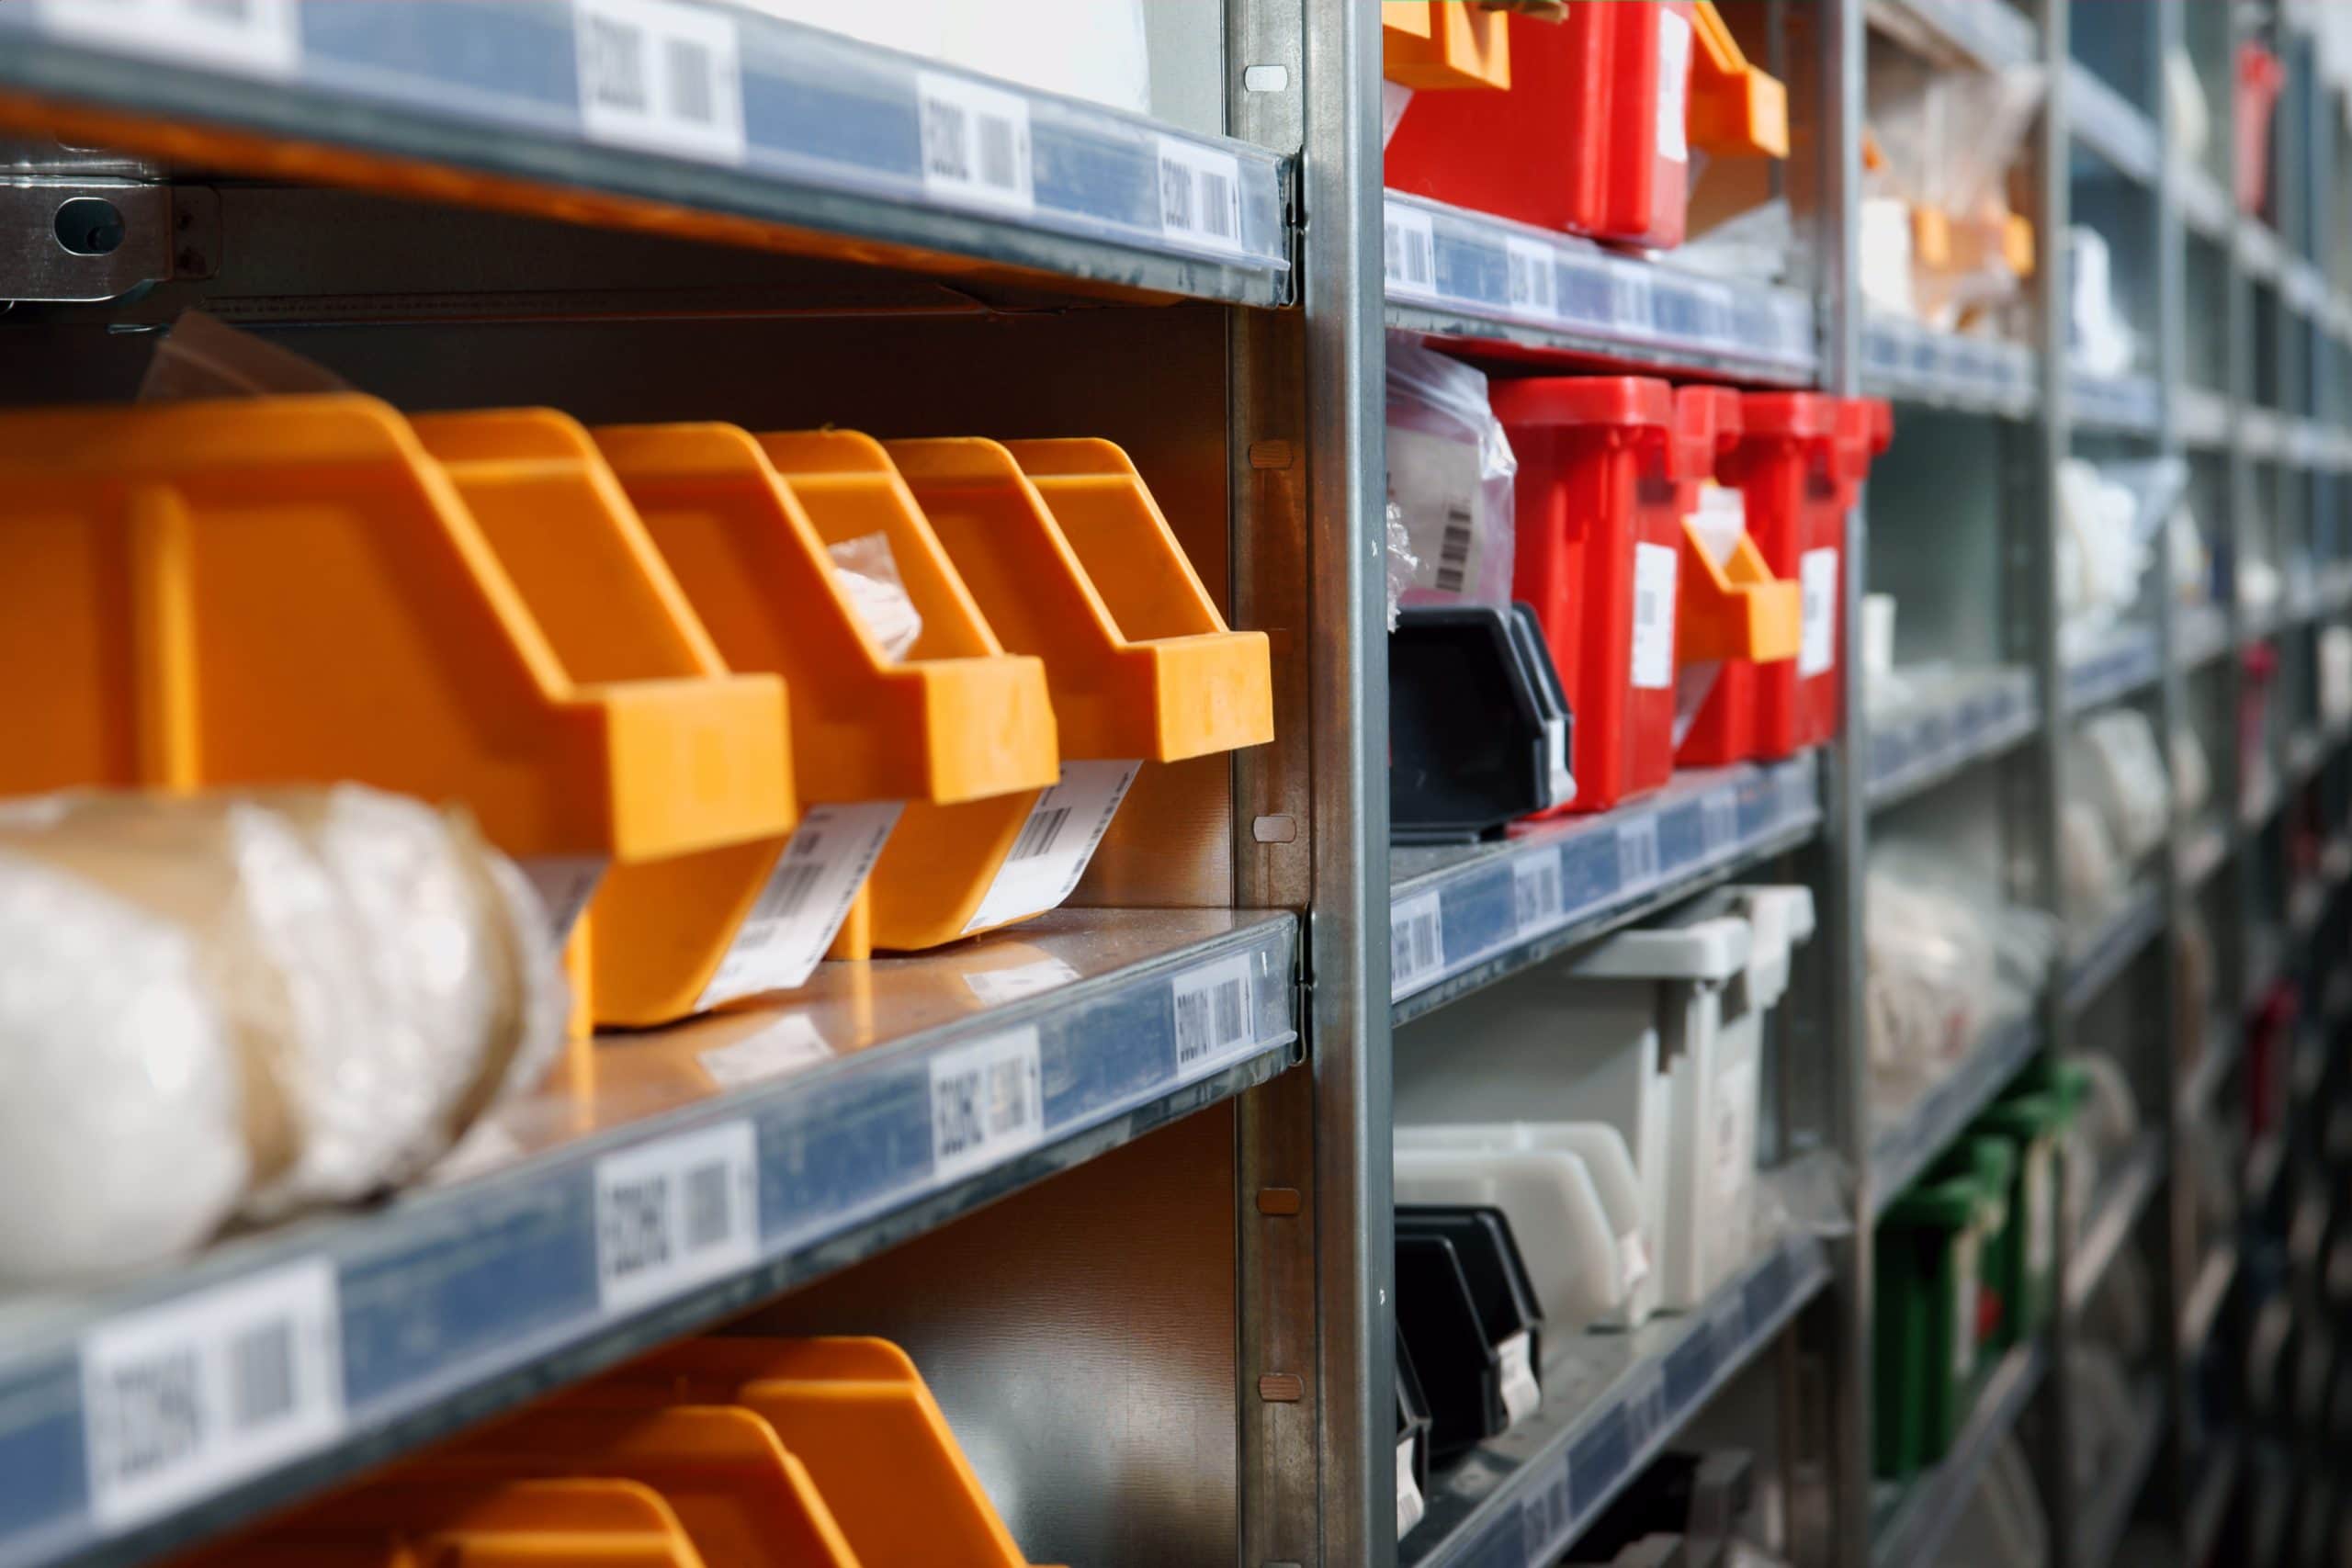 Purchasing guide: How to choose the right warehouse storage bins